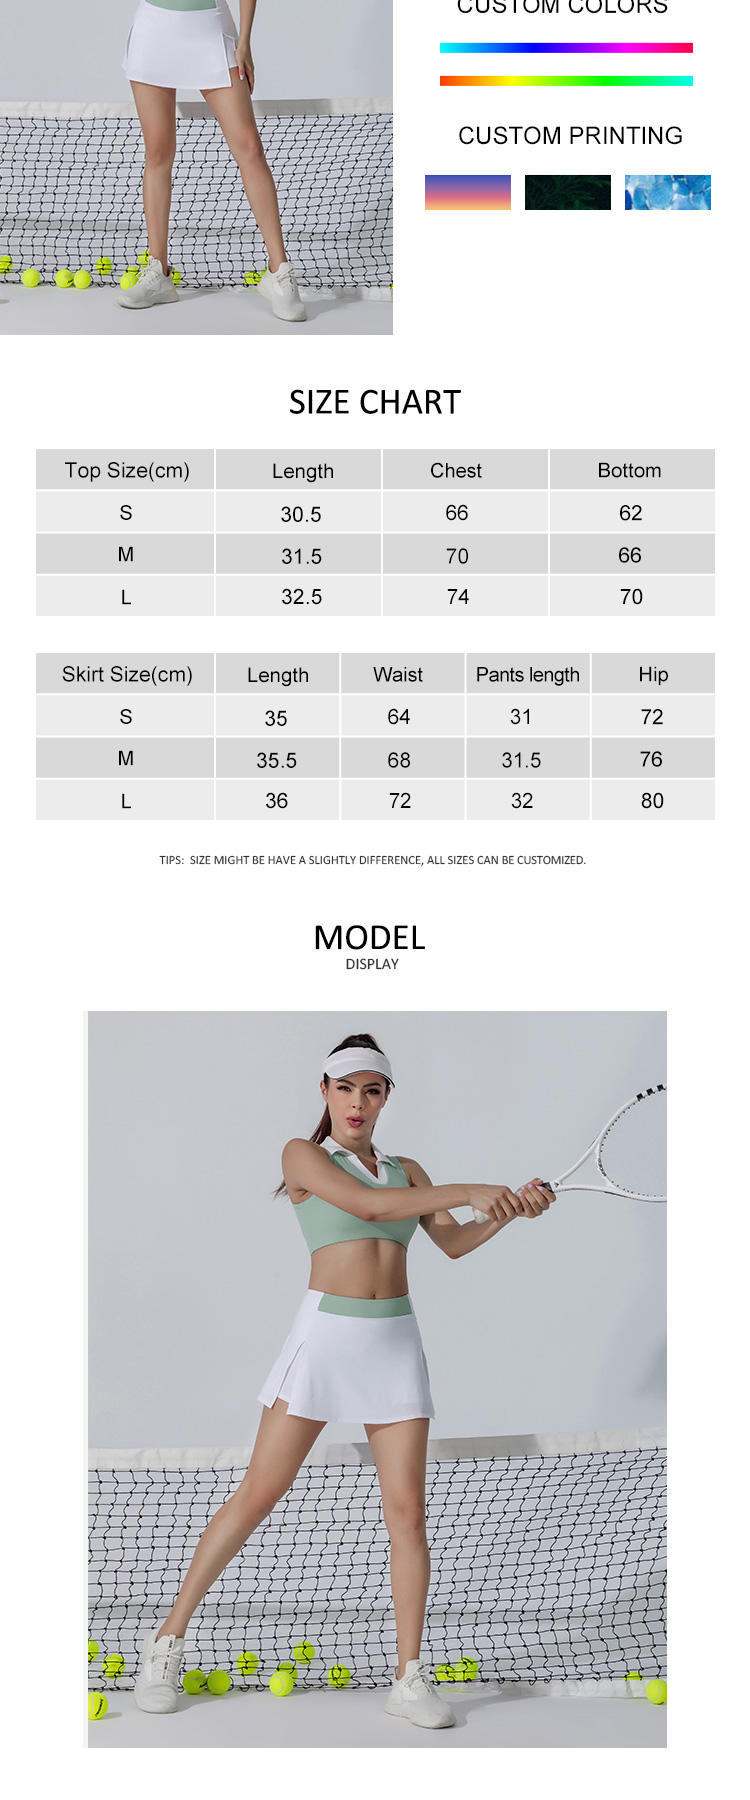 INGOR woman tennis wear production at the gym